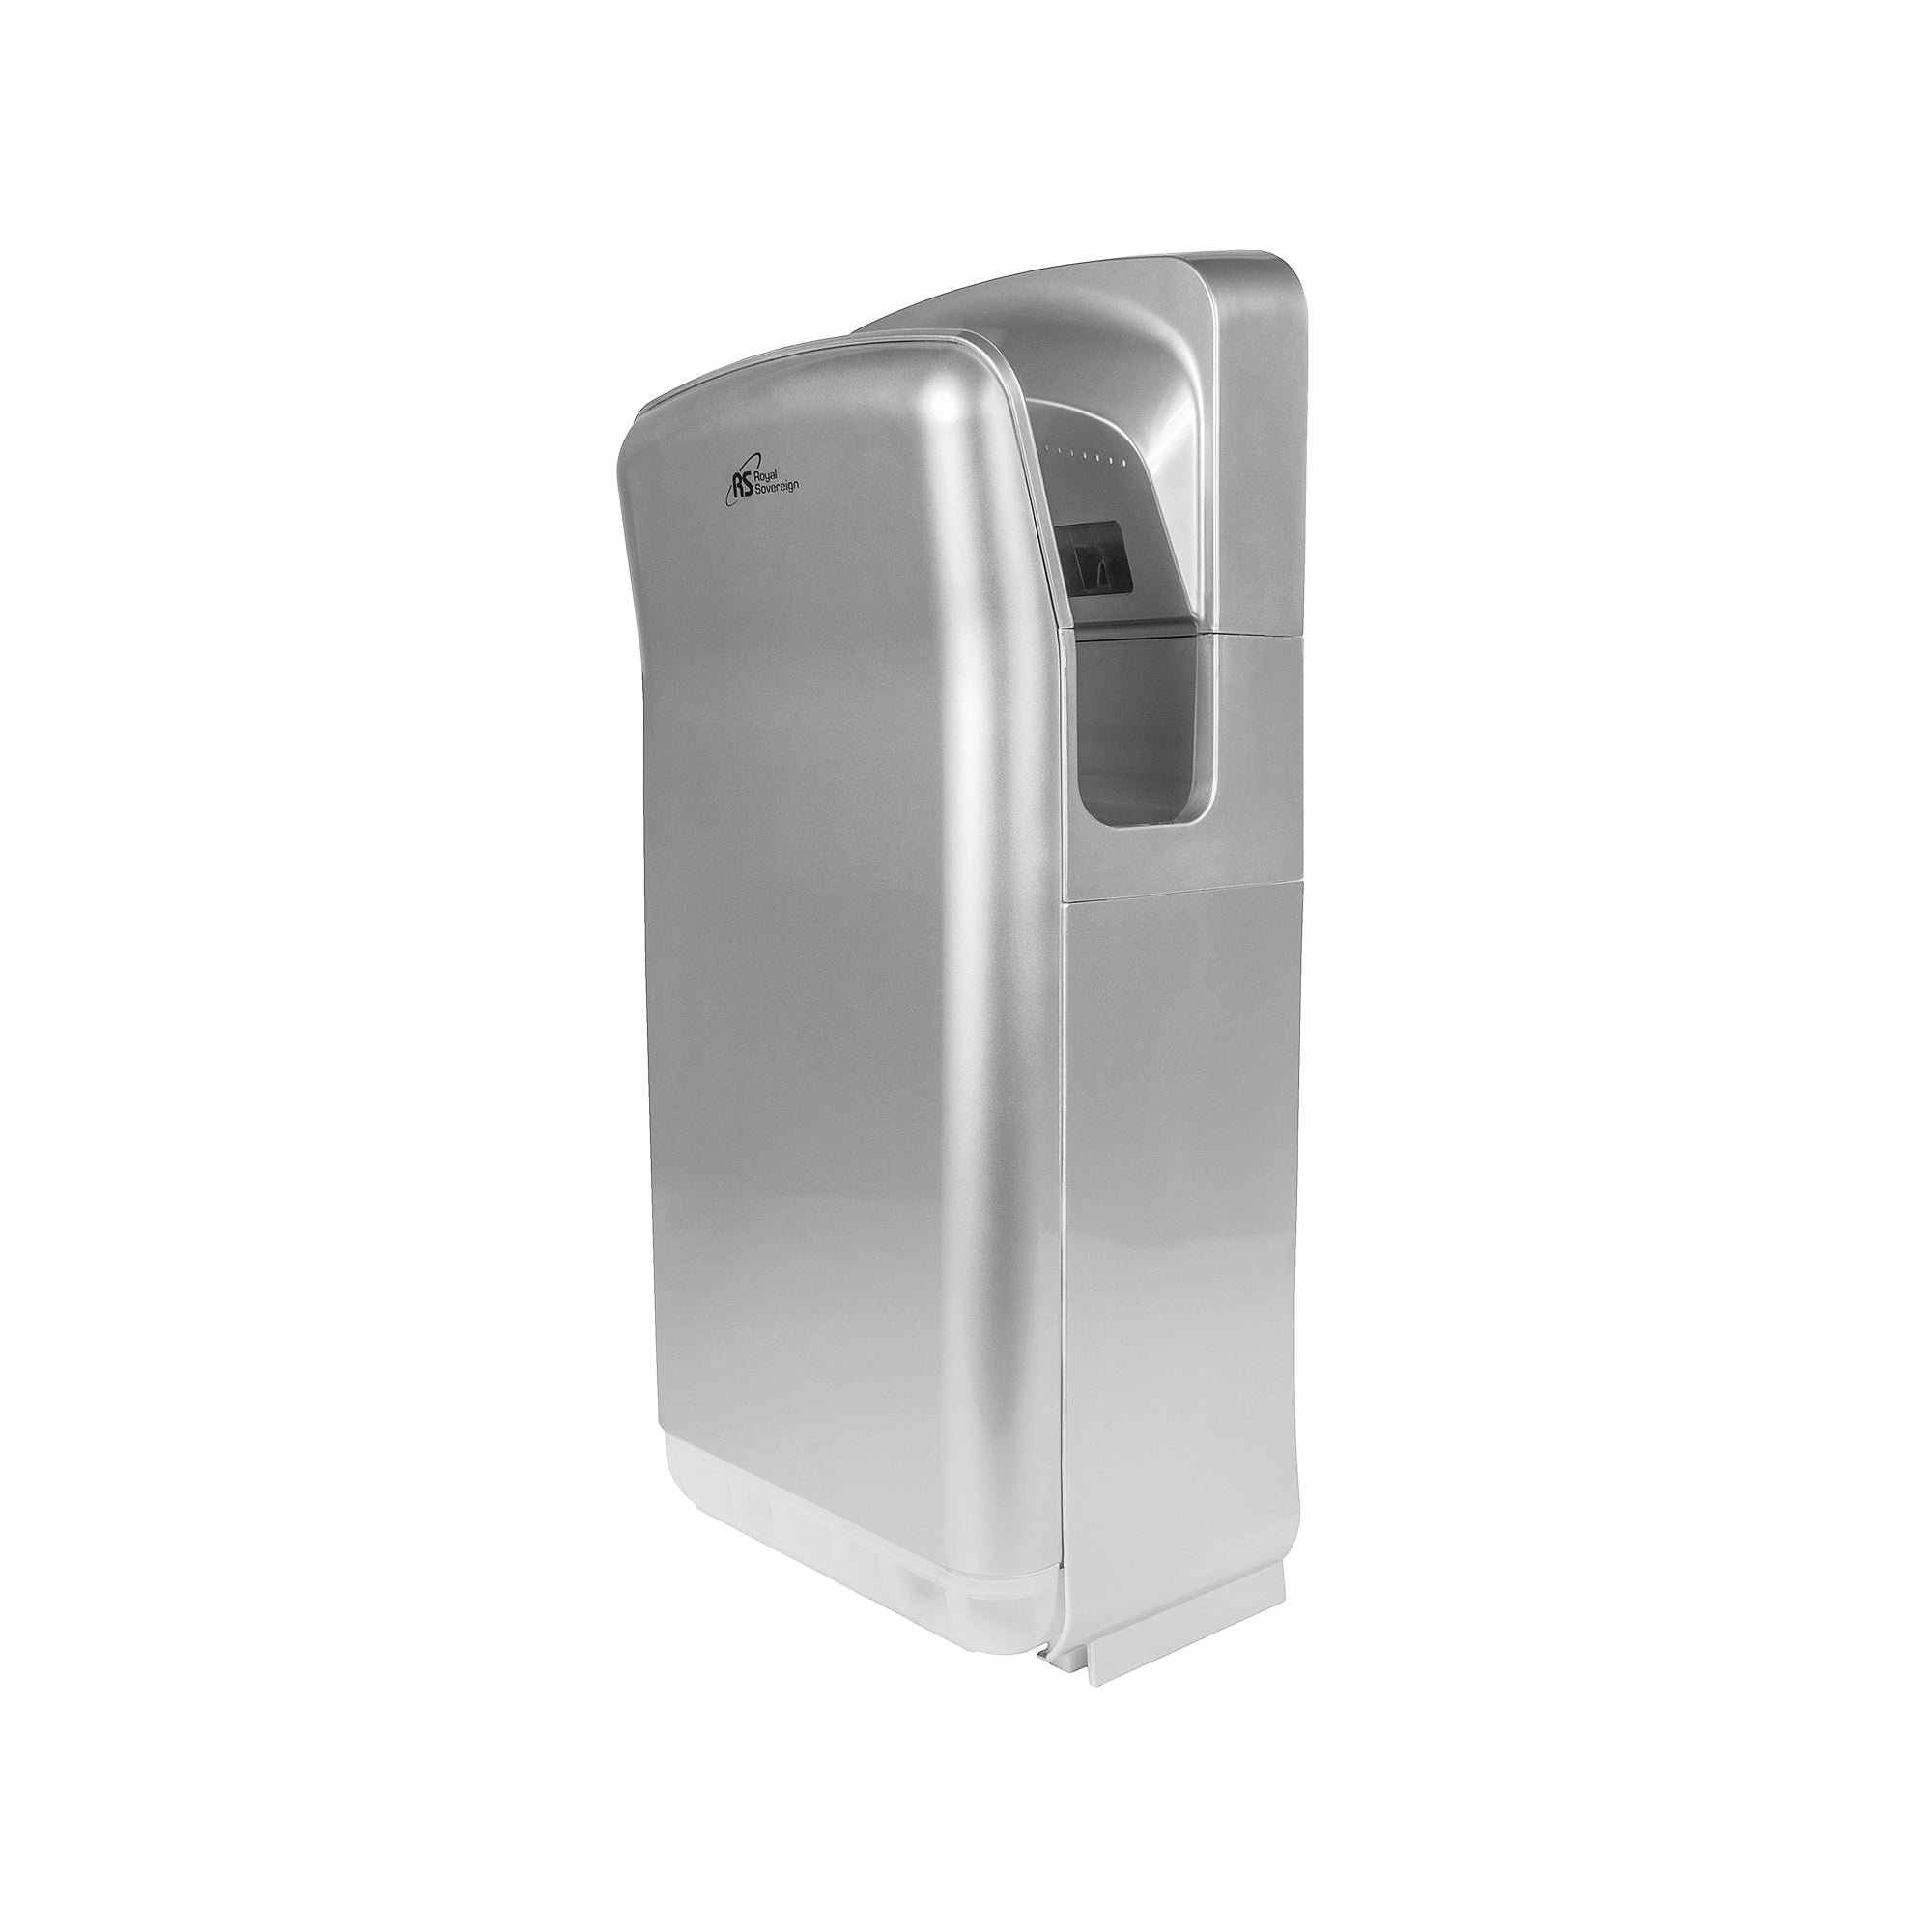 RTHD-461S, Vertical Touchless Automatic Hand Dryer